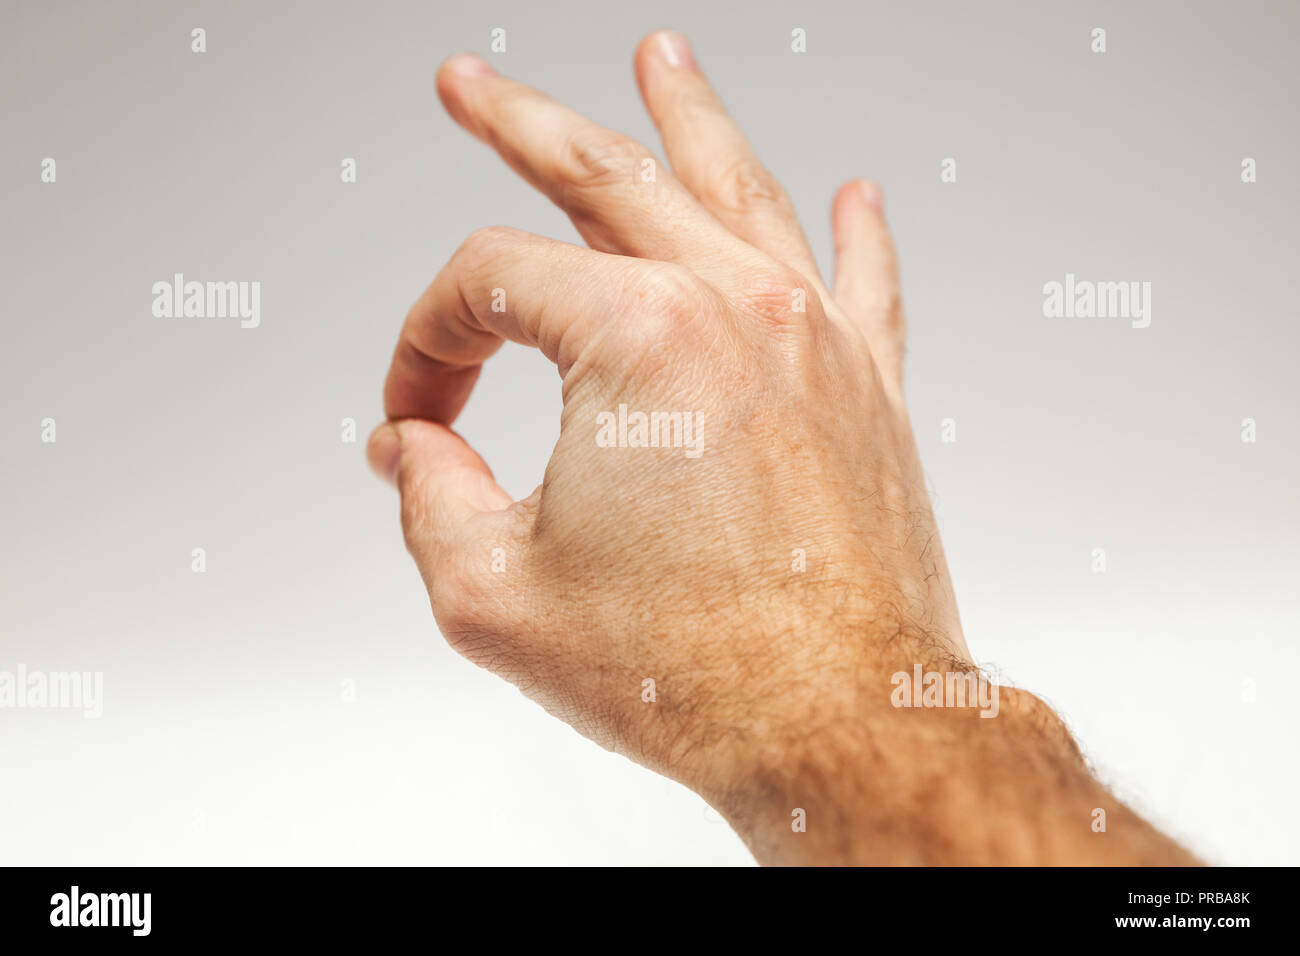 Closeup photo male hand showing Ok acceptance gesture over gray background Stock Photo